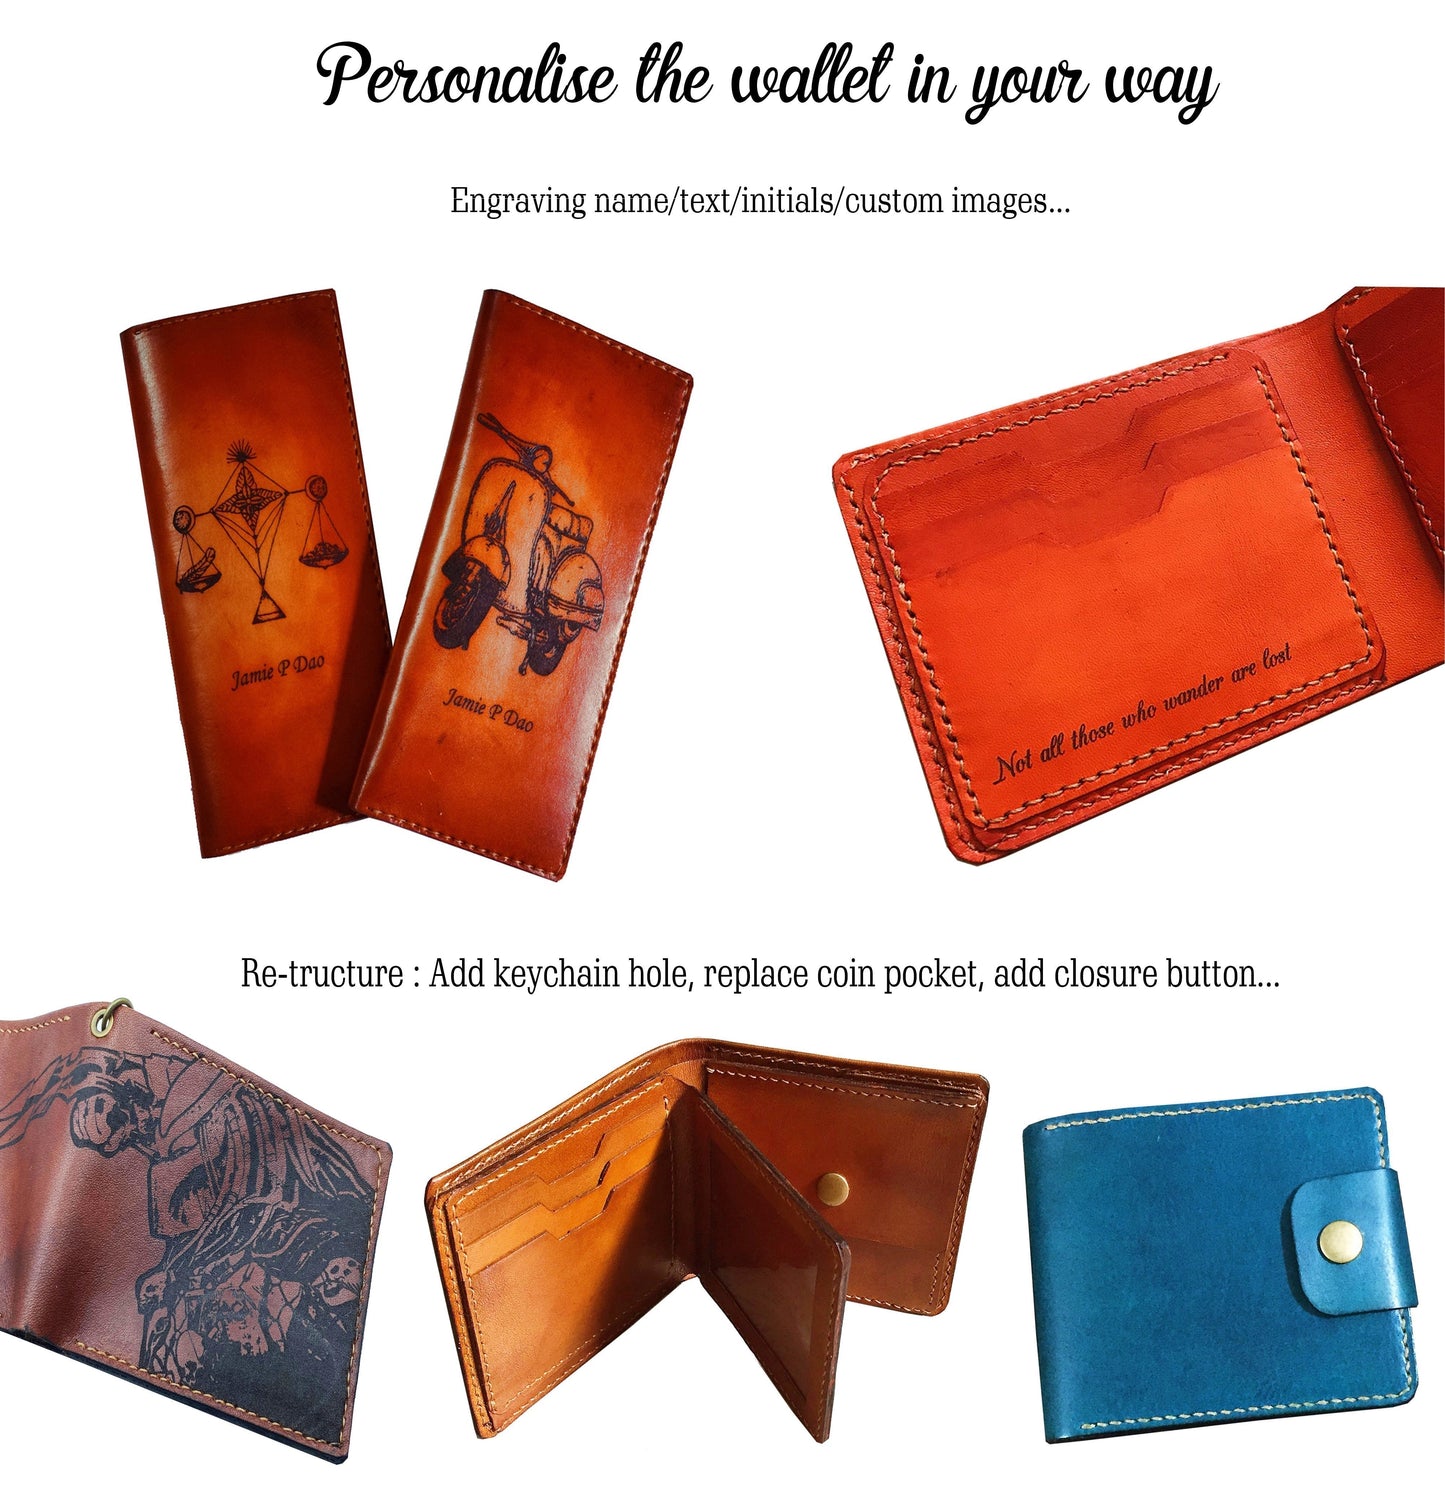 Custom leather gift for him, wallet for dad, cool leather present for boyfriend, starwars movie characters wallet